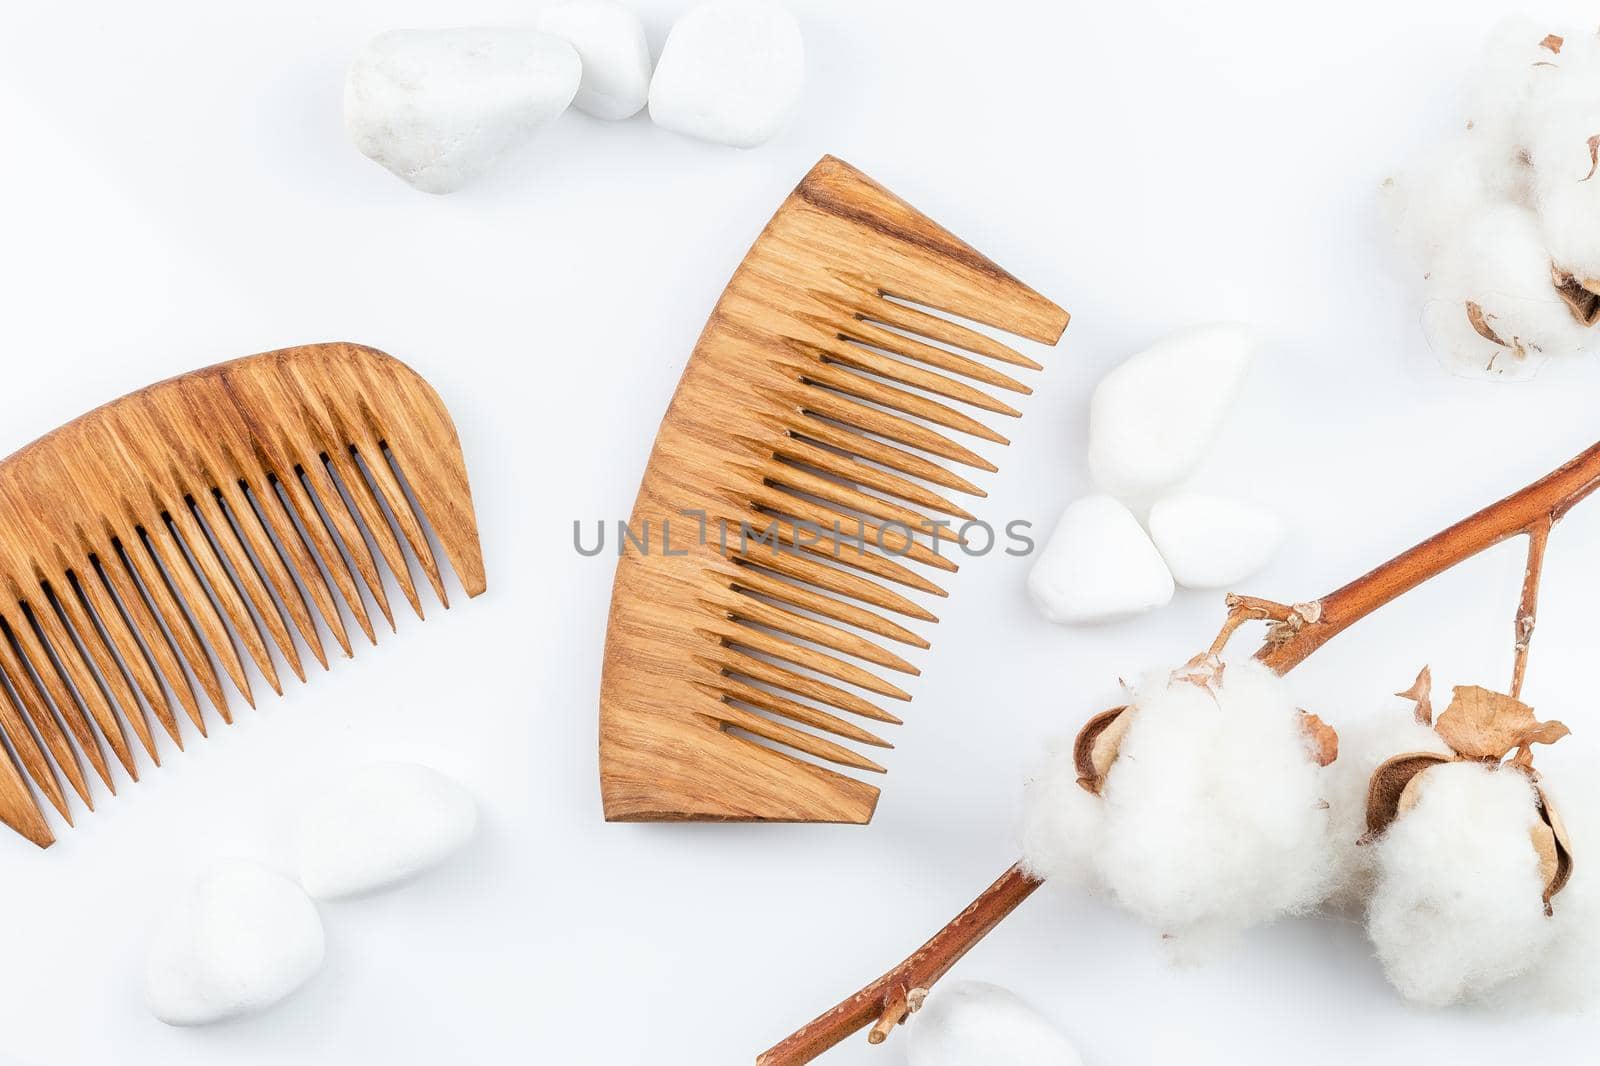 Wooden hair combs on a white background. Personal care, zero waste, sustainable lifestyle